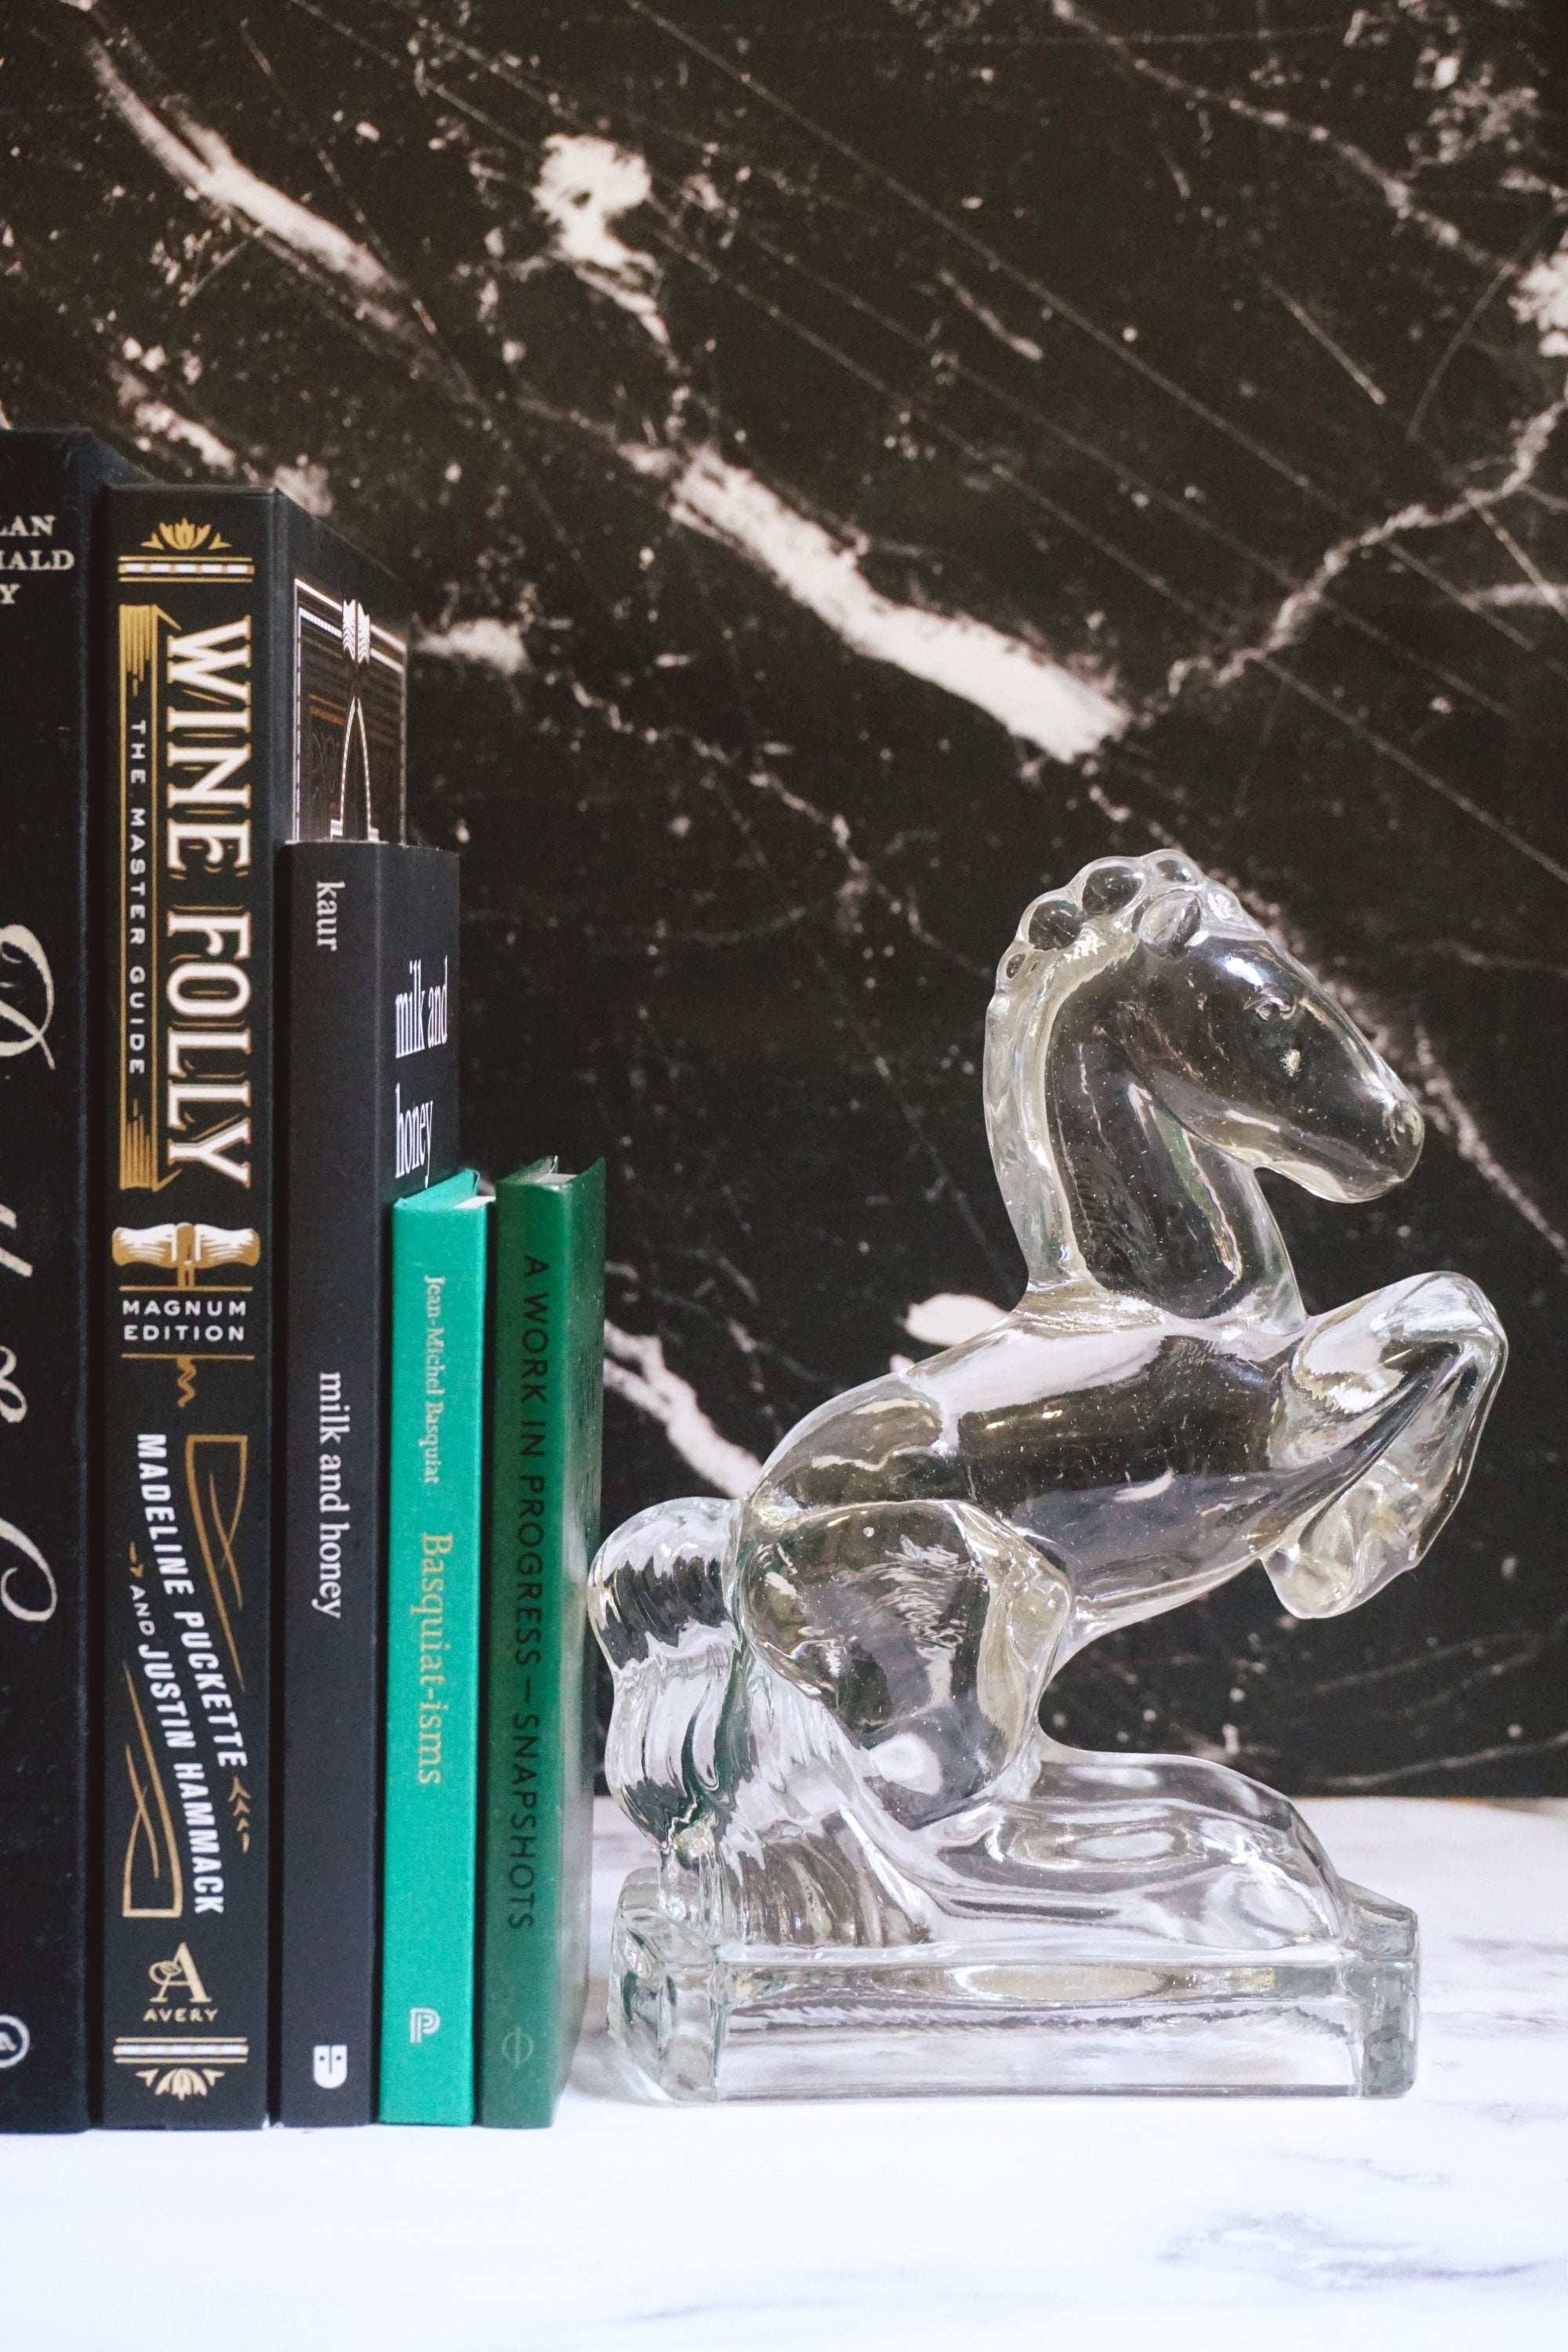 Pair of Vintage 1940s Clear Glass Rearing Horse Bookends By L.E. Smith - Urban Nomad NYC